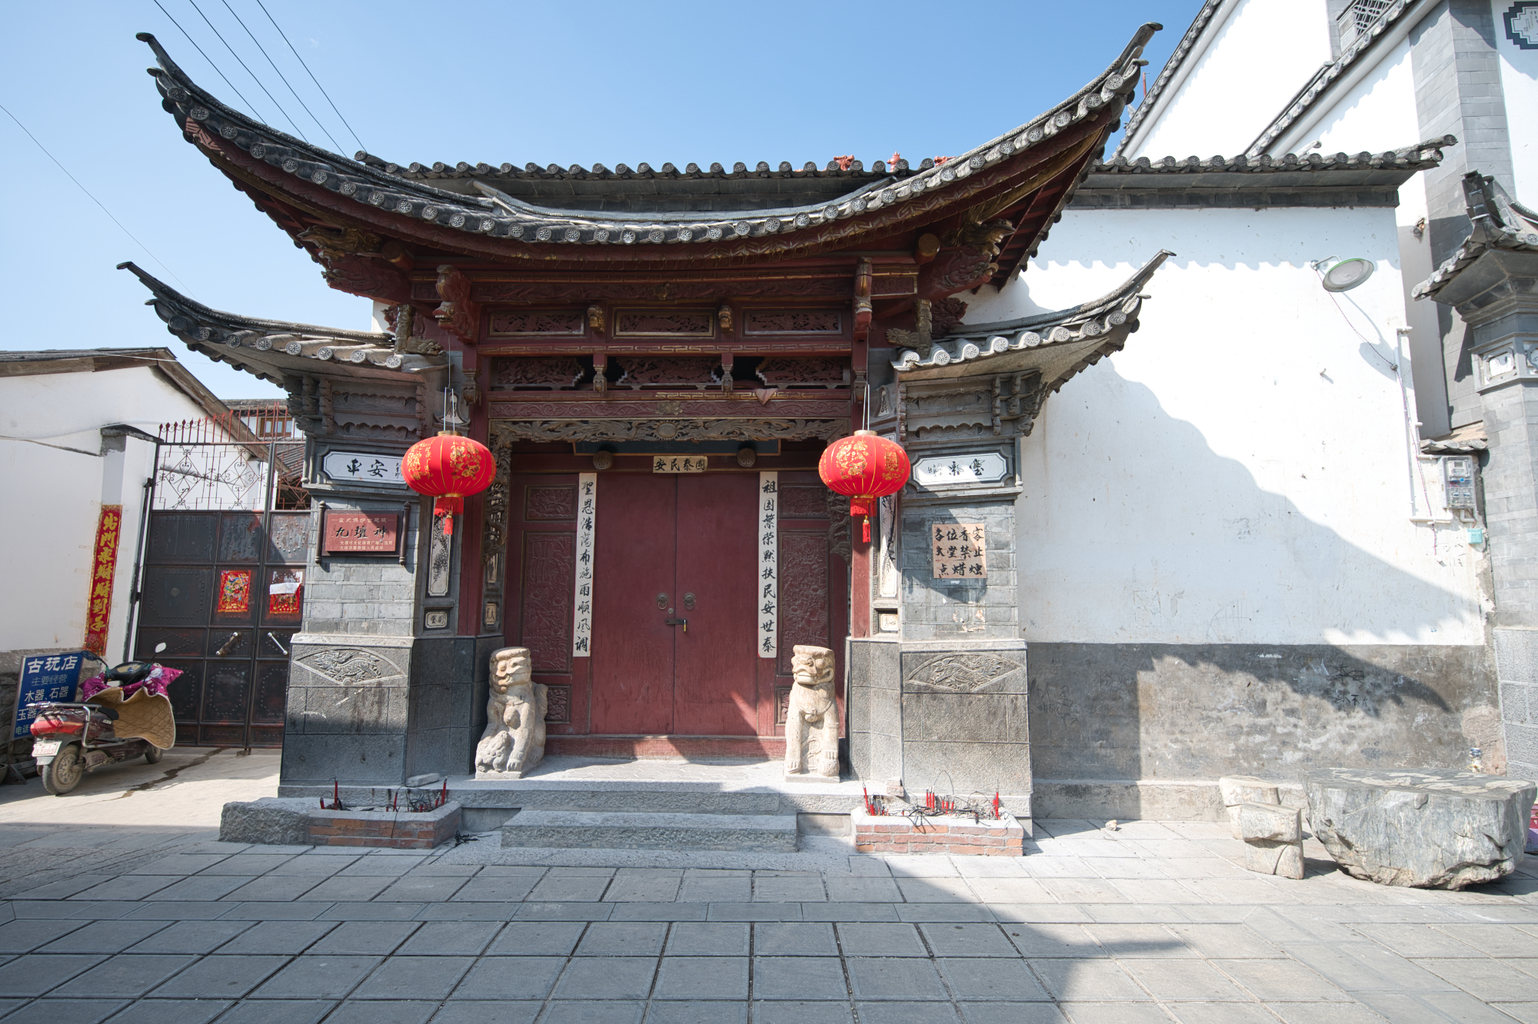 Picture: One of Xizhou's most active temples.